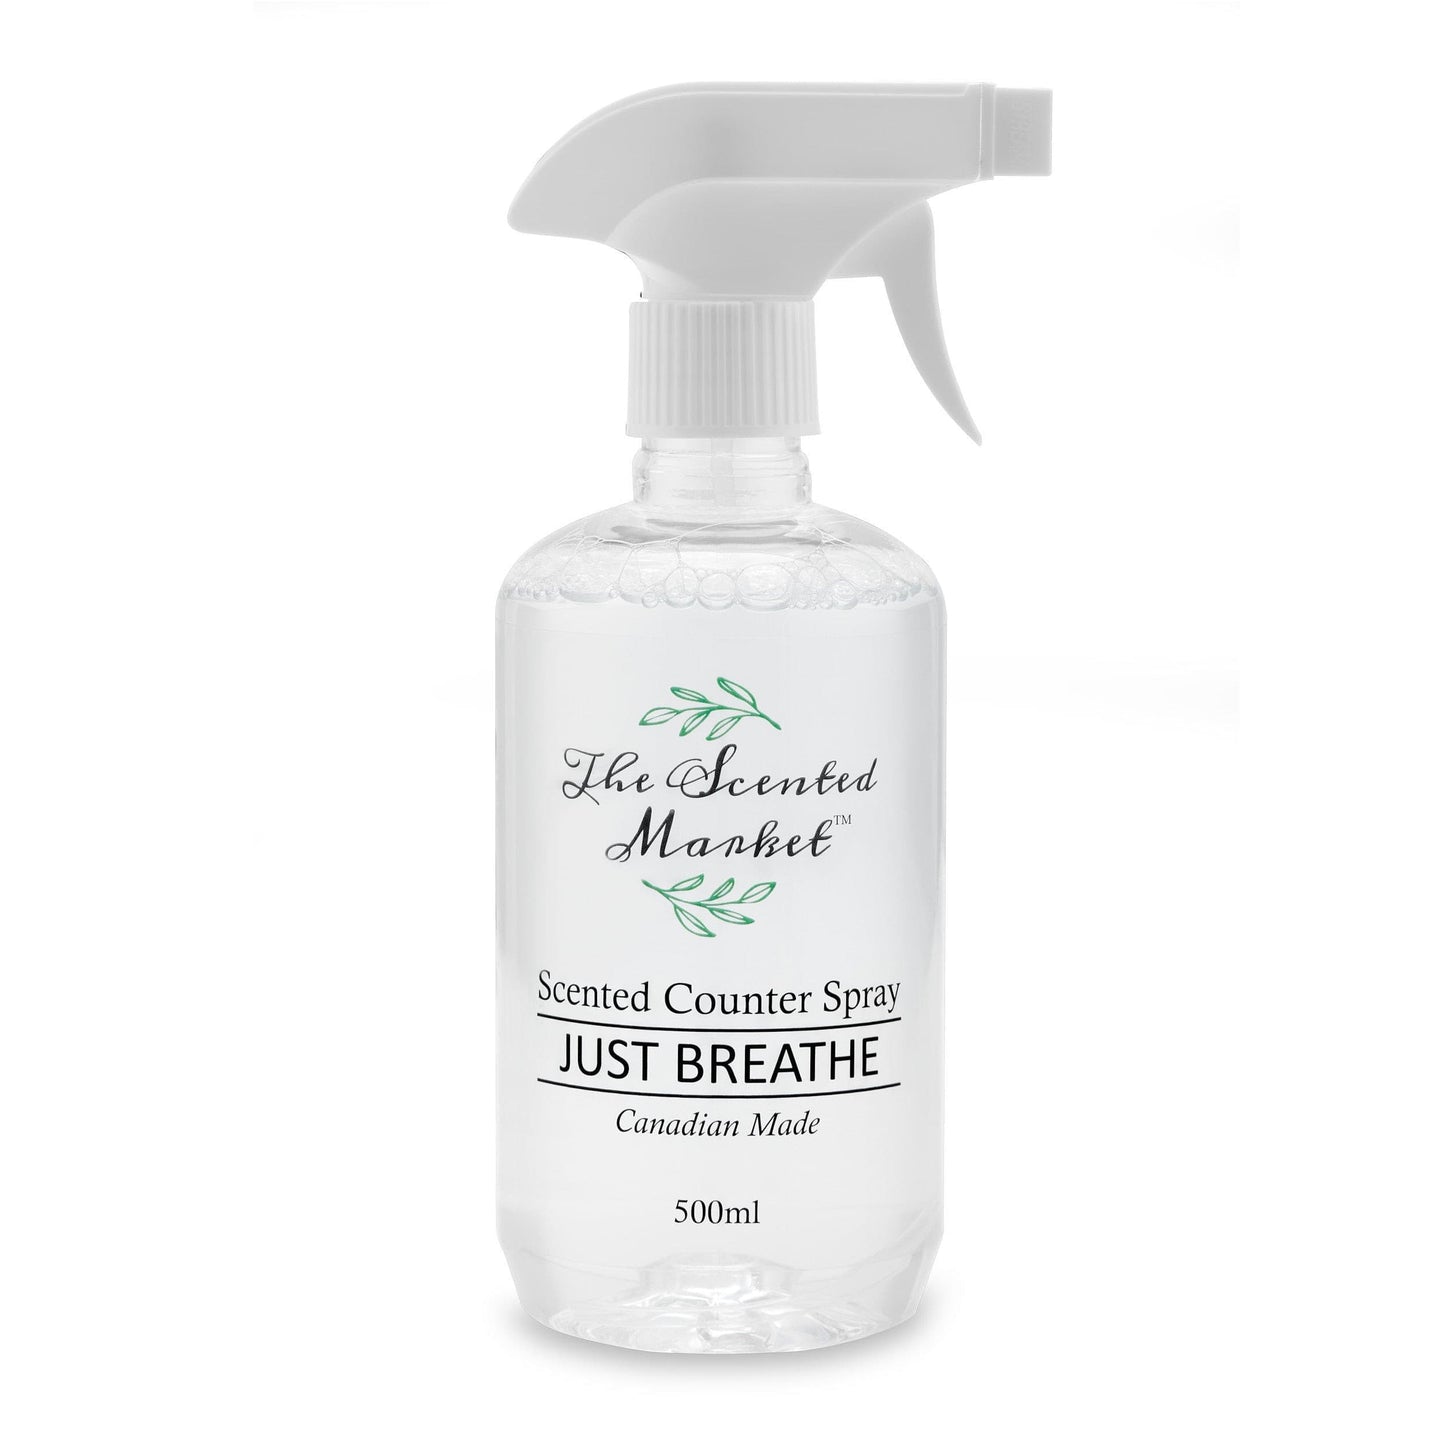 JUST BREATHE Cleaning Spray